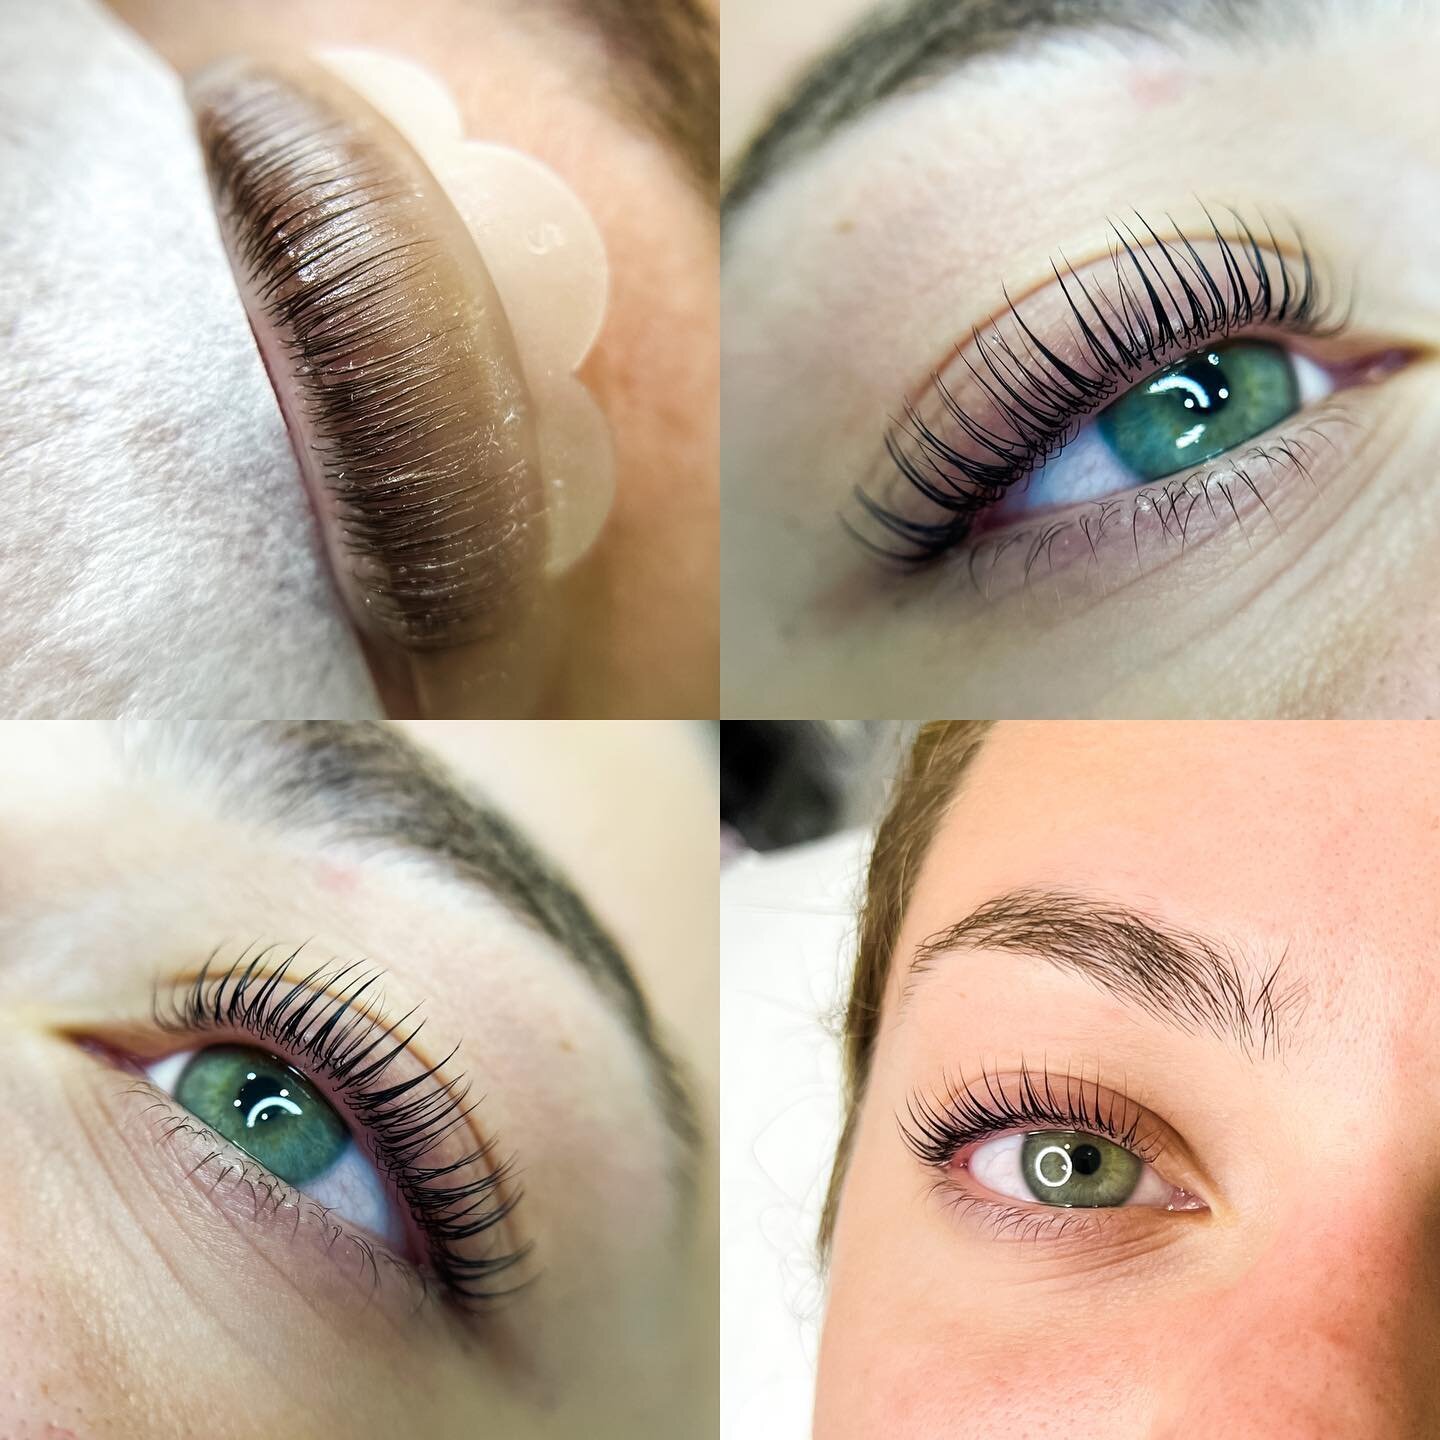 After 3 treatments the natural lashes will grow thicker and longer by 24% - magic right?! Try our lash filler now! 
Book in via this link www.whiplashperth.as.me

#perthlashlift #inlei #perthsalon #perthmakeupartist #perthtodo #perthppe